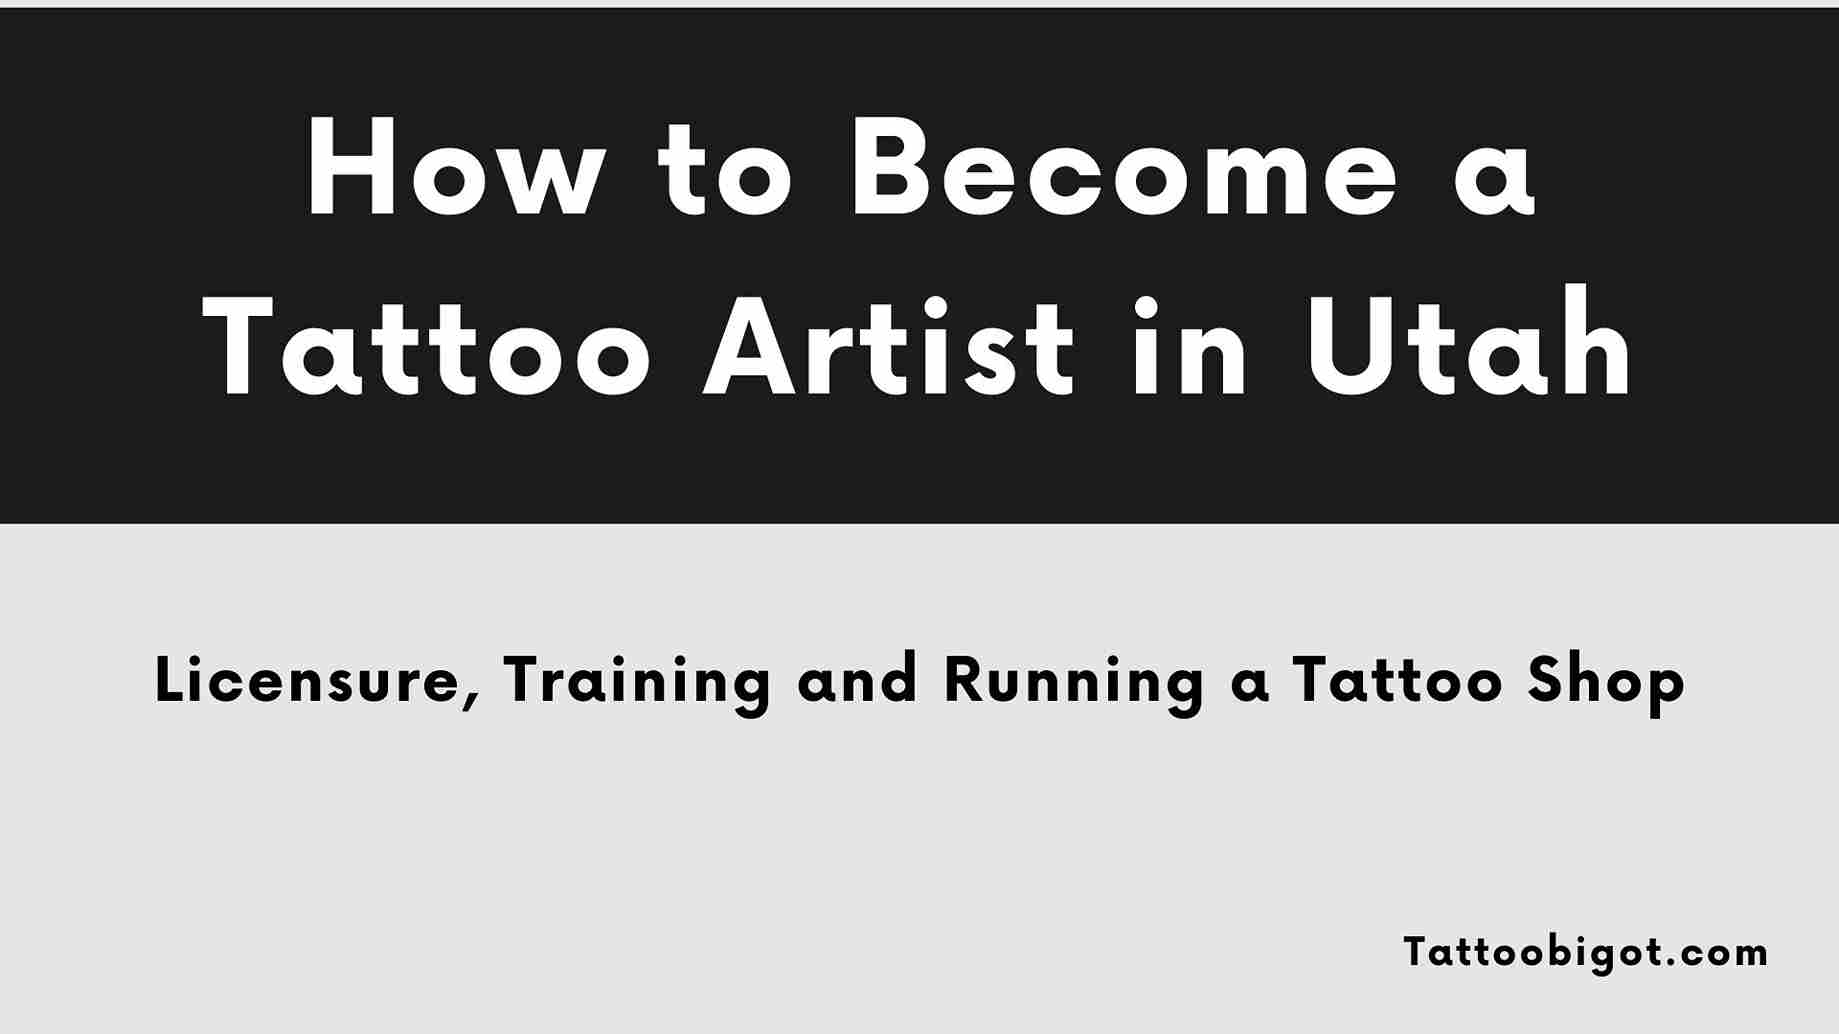 How to Become a Tattoo Artist in Utah